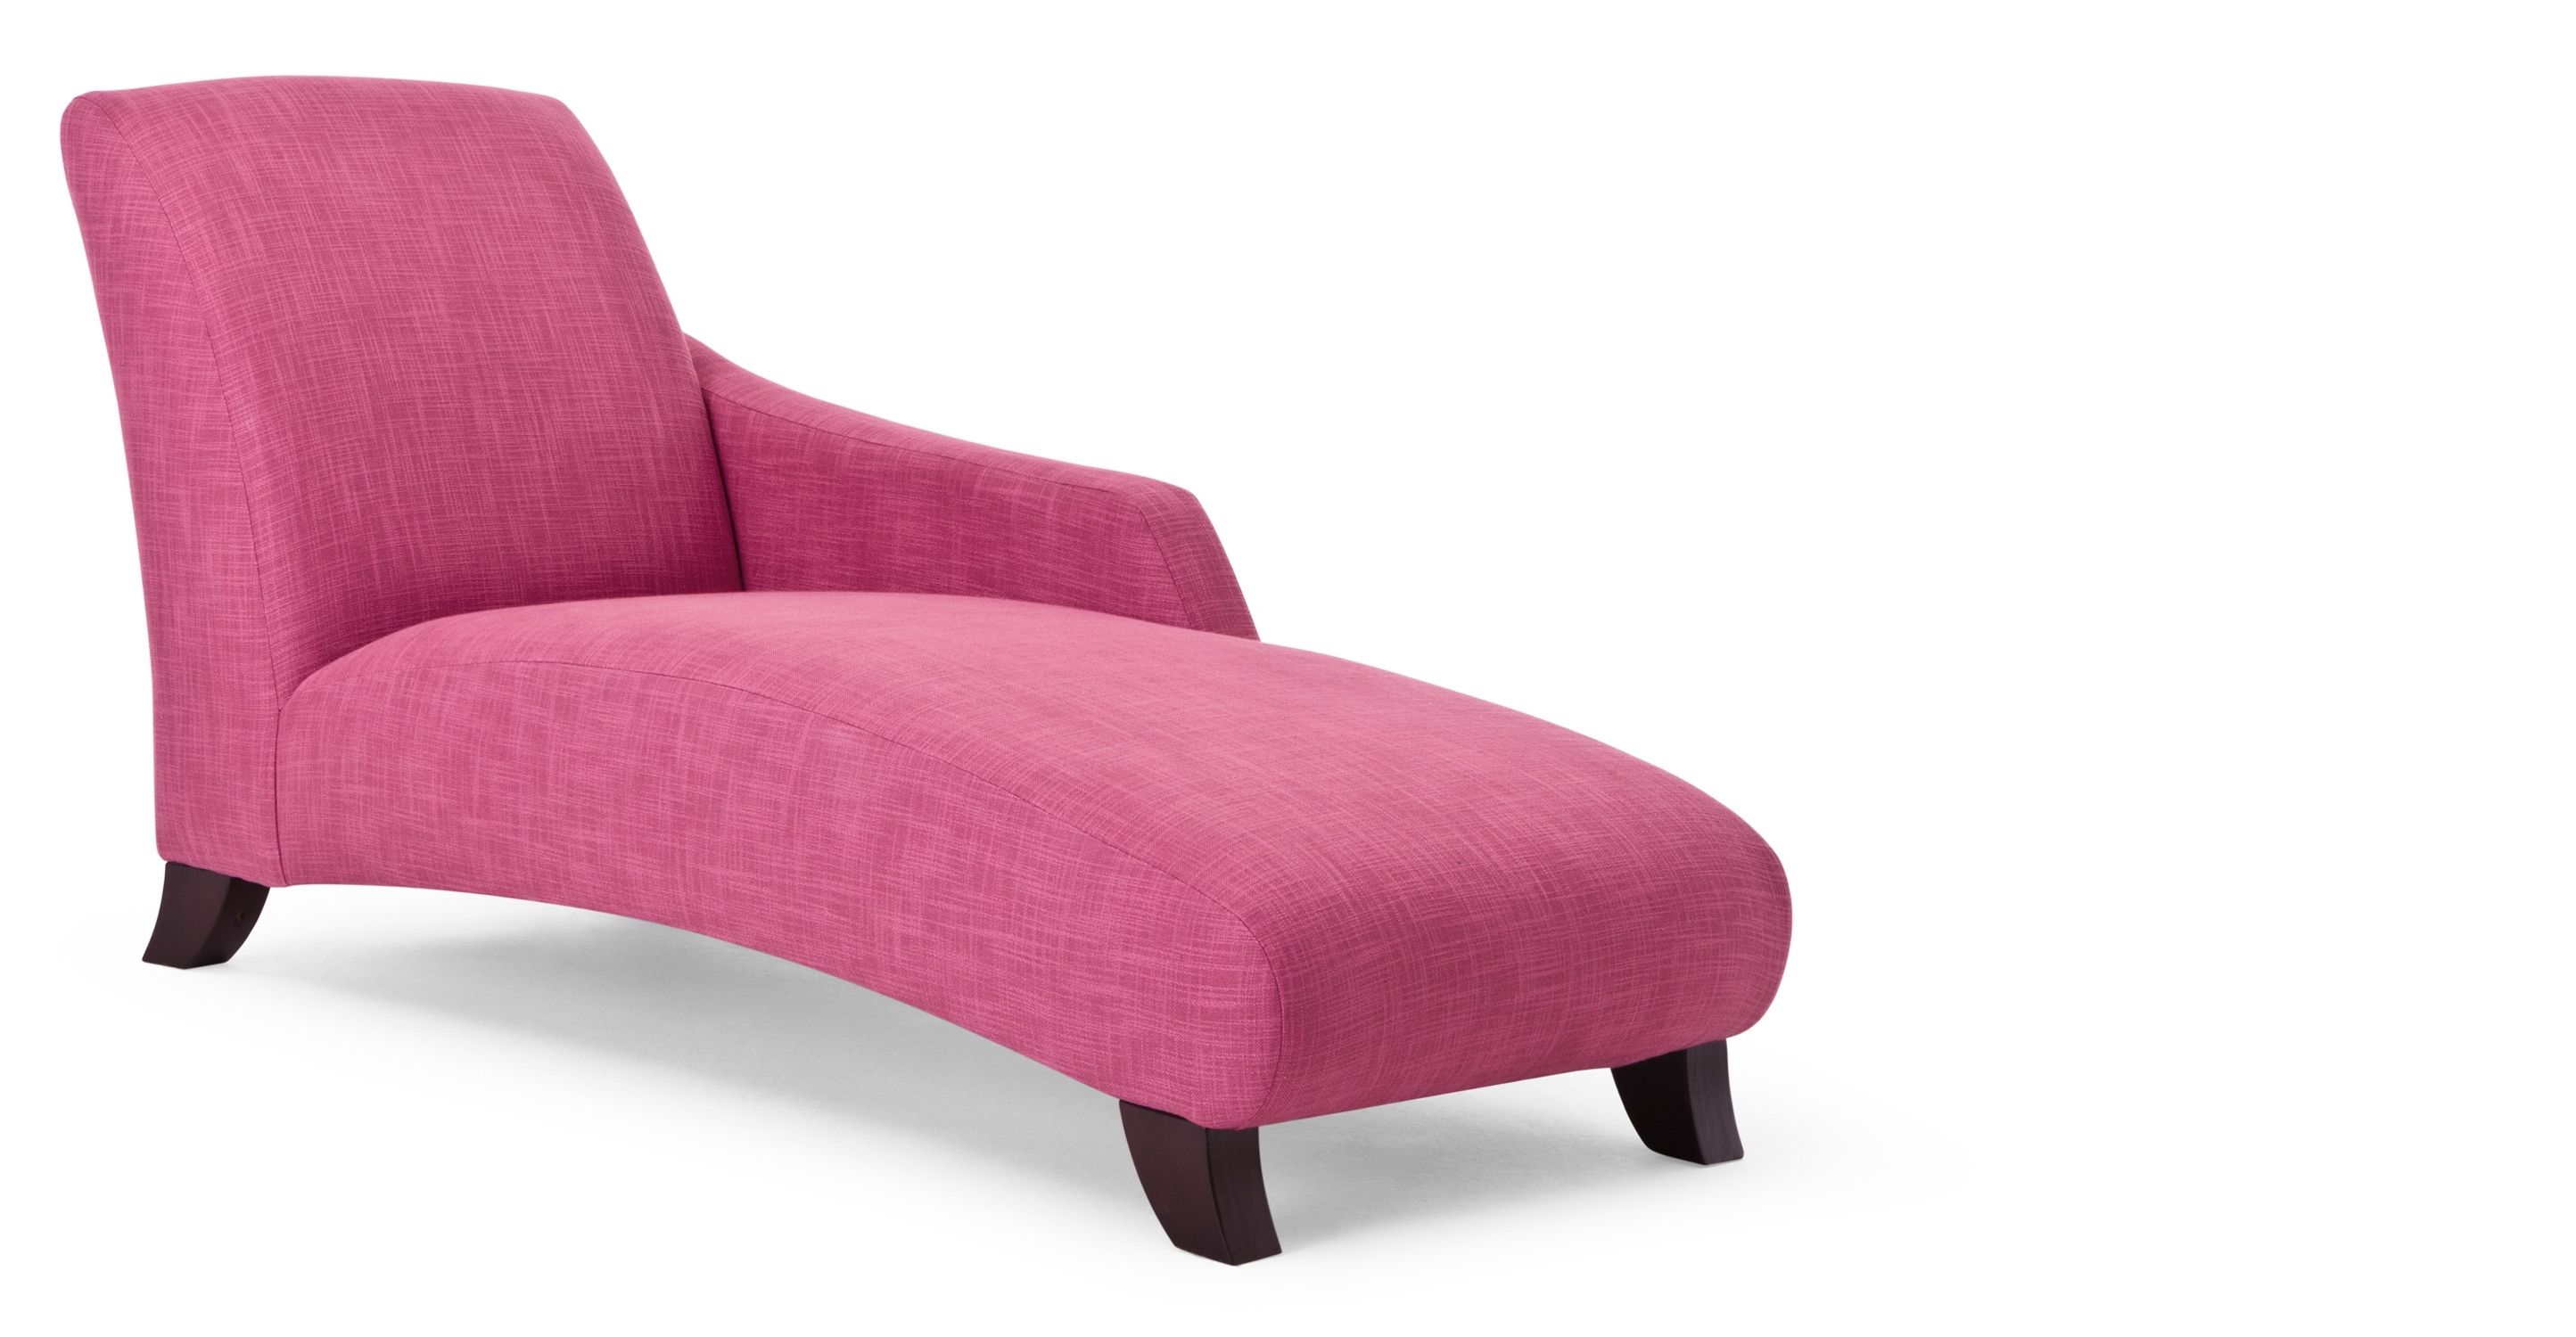 Preferred Pink Chaise Lounges With Regard To Bedroom: Chaise Lounge Chair For Bedroom In Pink Theme Made Of (View 9 of 15)